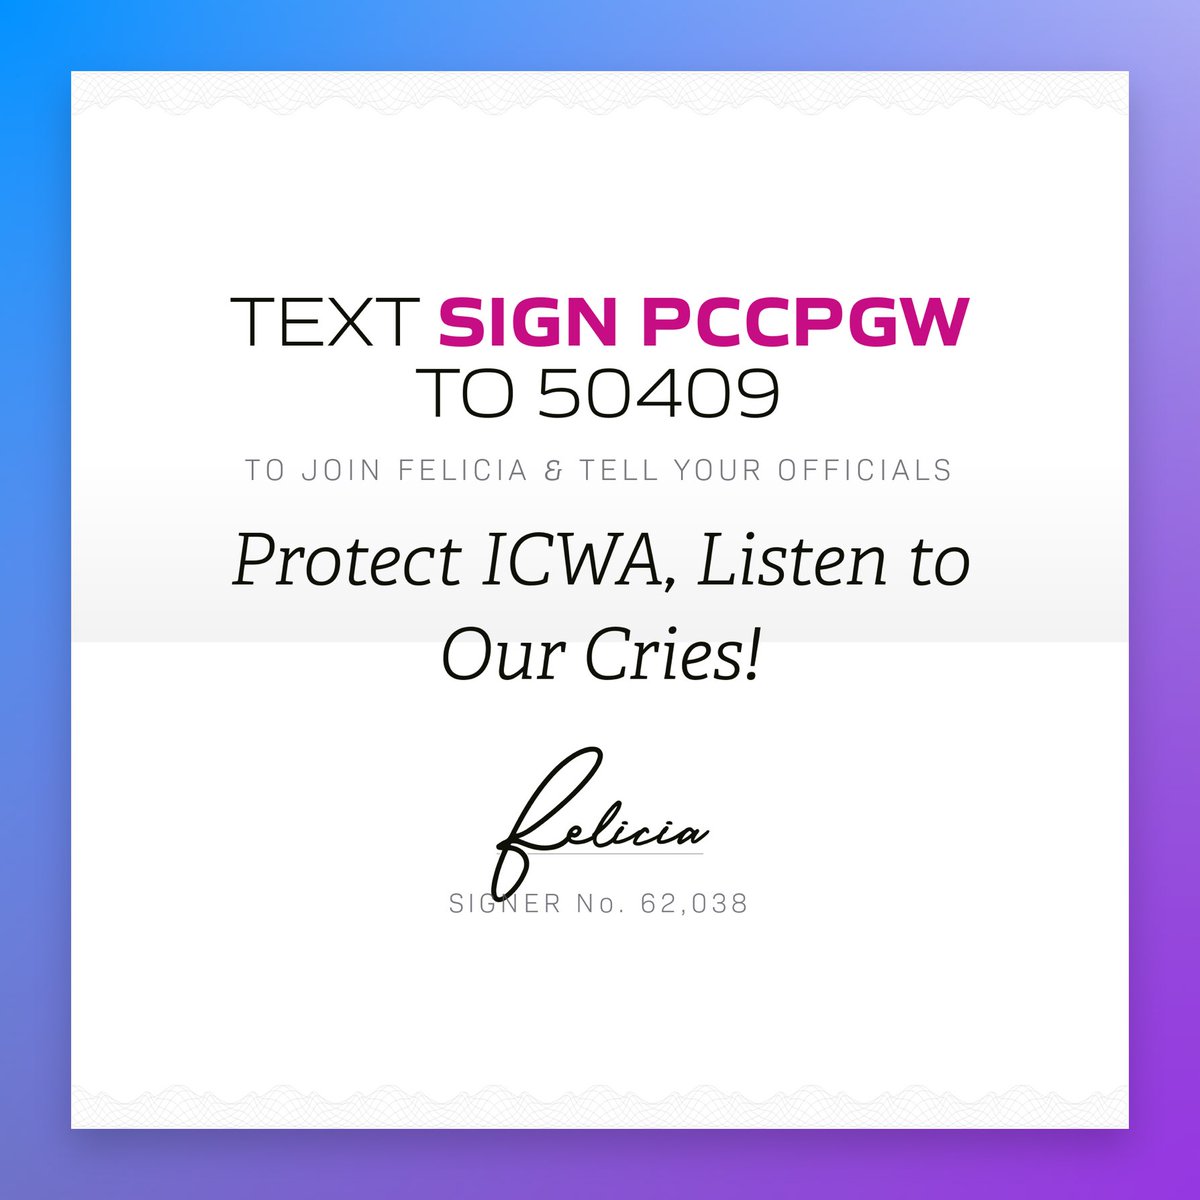 #ProtectICWA 

My grandma was forced to take the name Theresa Marie Williams after being taken from her #Sioux people. She was one of the #StolenChildren. Allowing #ICWA to fall will start that nightmare up again. #ProtectNativeFamilies #ProtectIndigenousFamilies